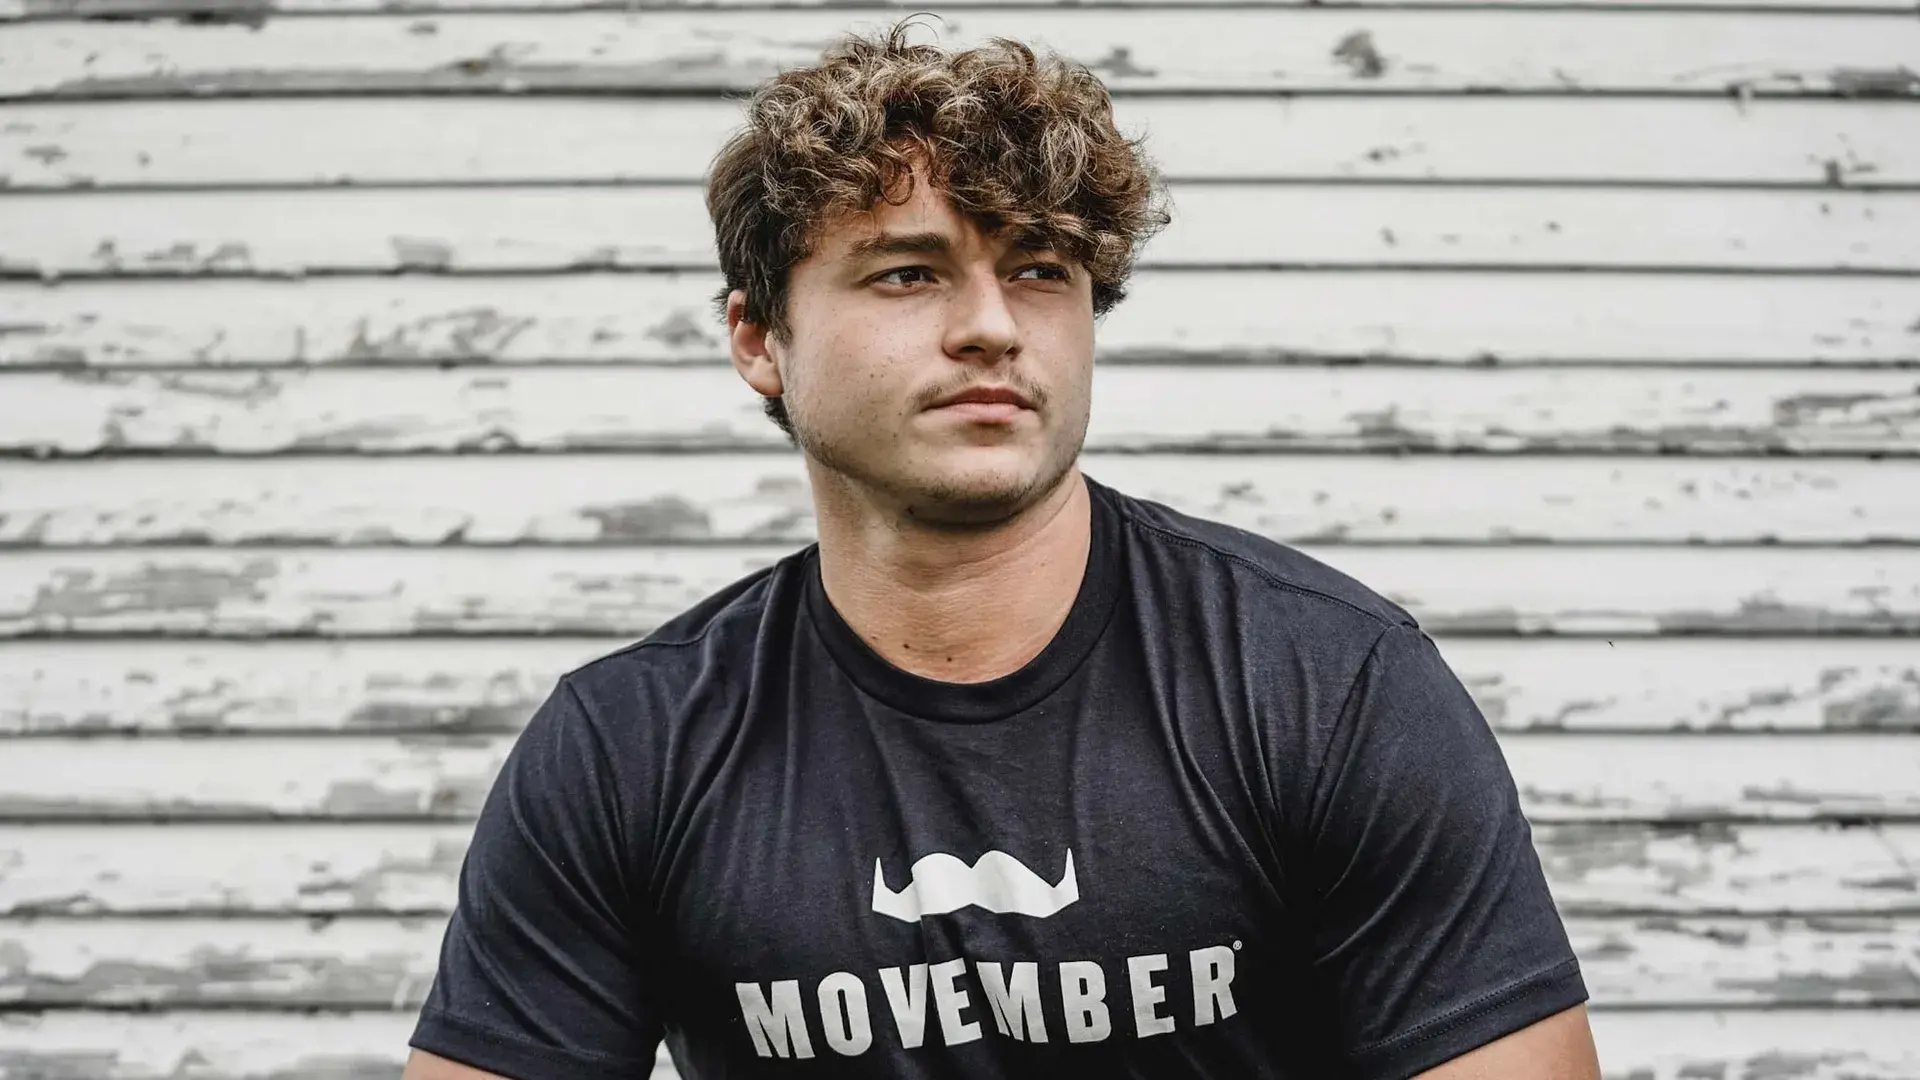 Young man sporting Movember-branded shirt.